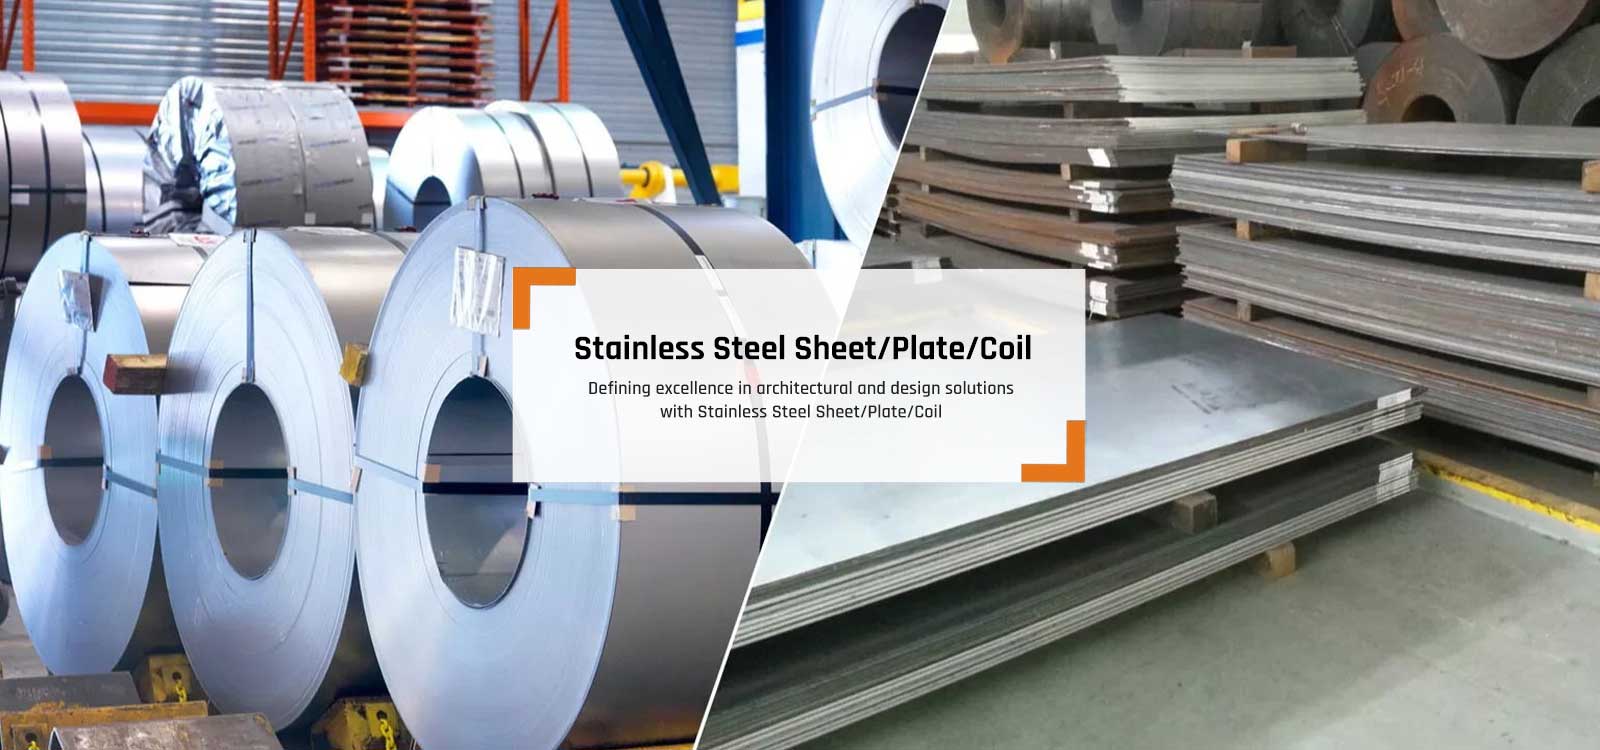 Stainless Steel Sheet Plates Coils Manufacturers in Himachal Pradesh